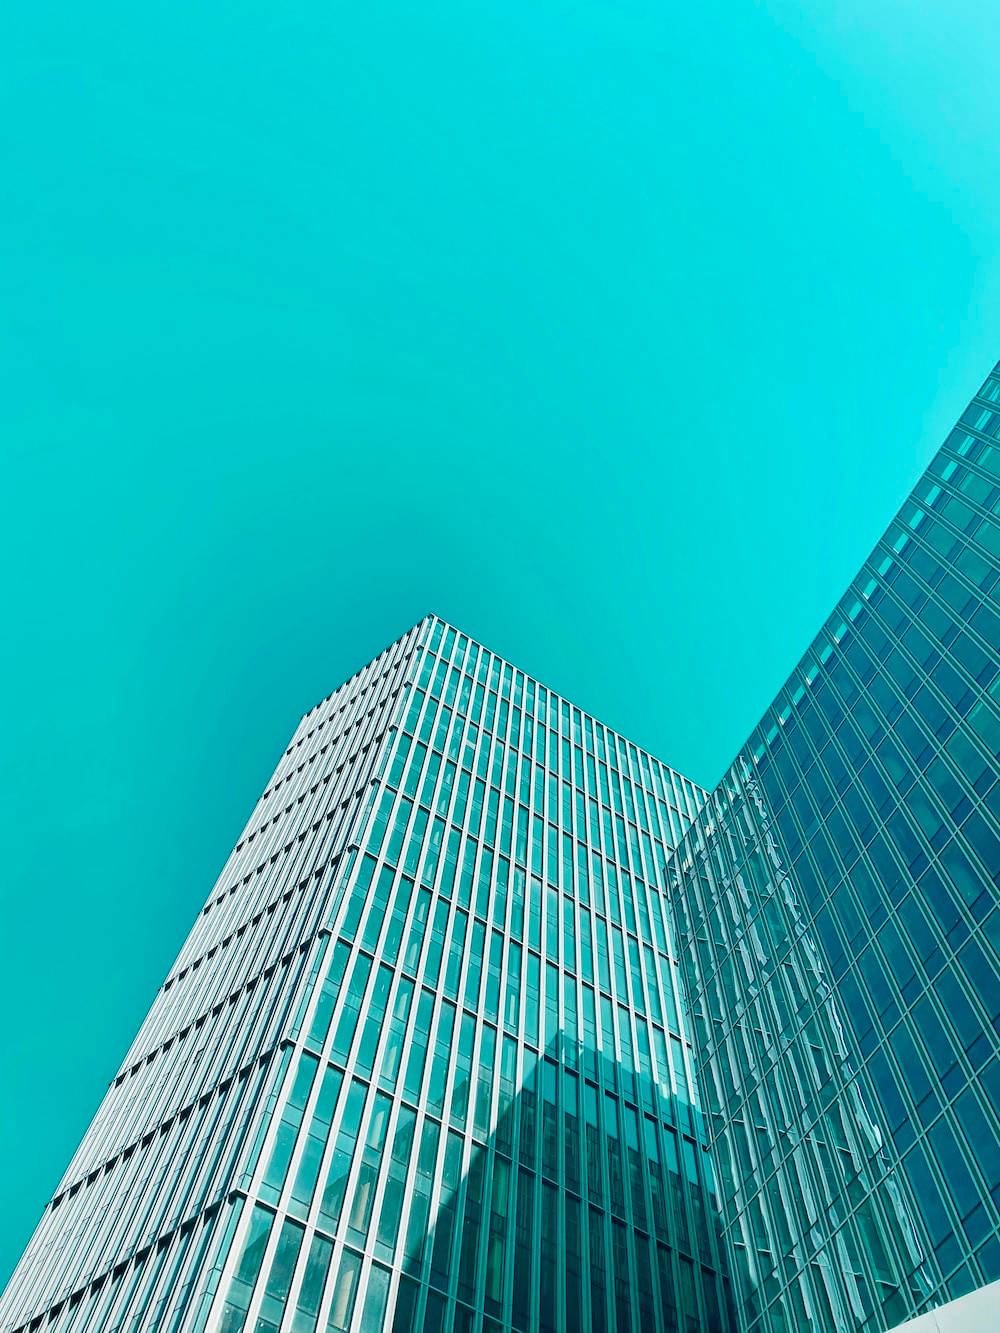 Cyan Sky And Building Background